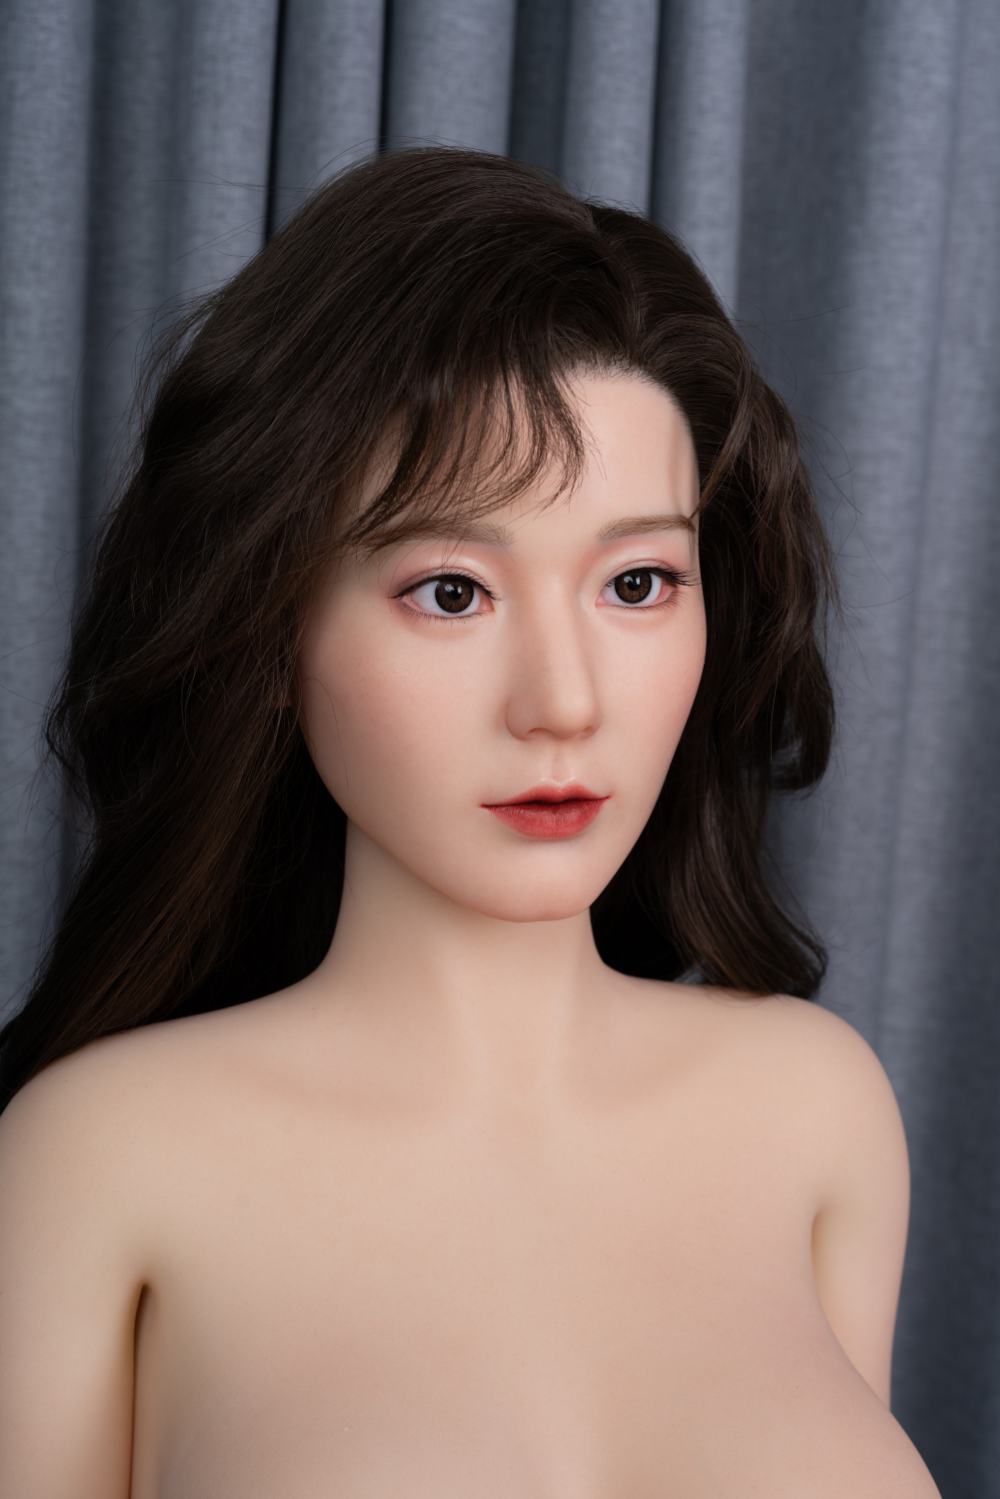 Zelex Doll 165 cm F Fusion - Rena | Buy Sex Dolls at DOLLS ACTUALLY